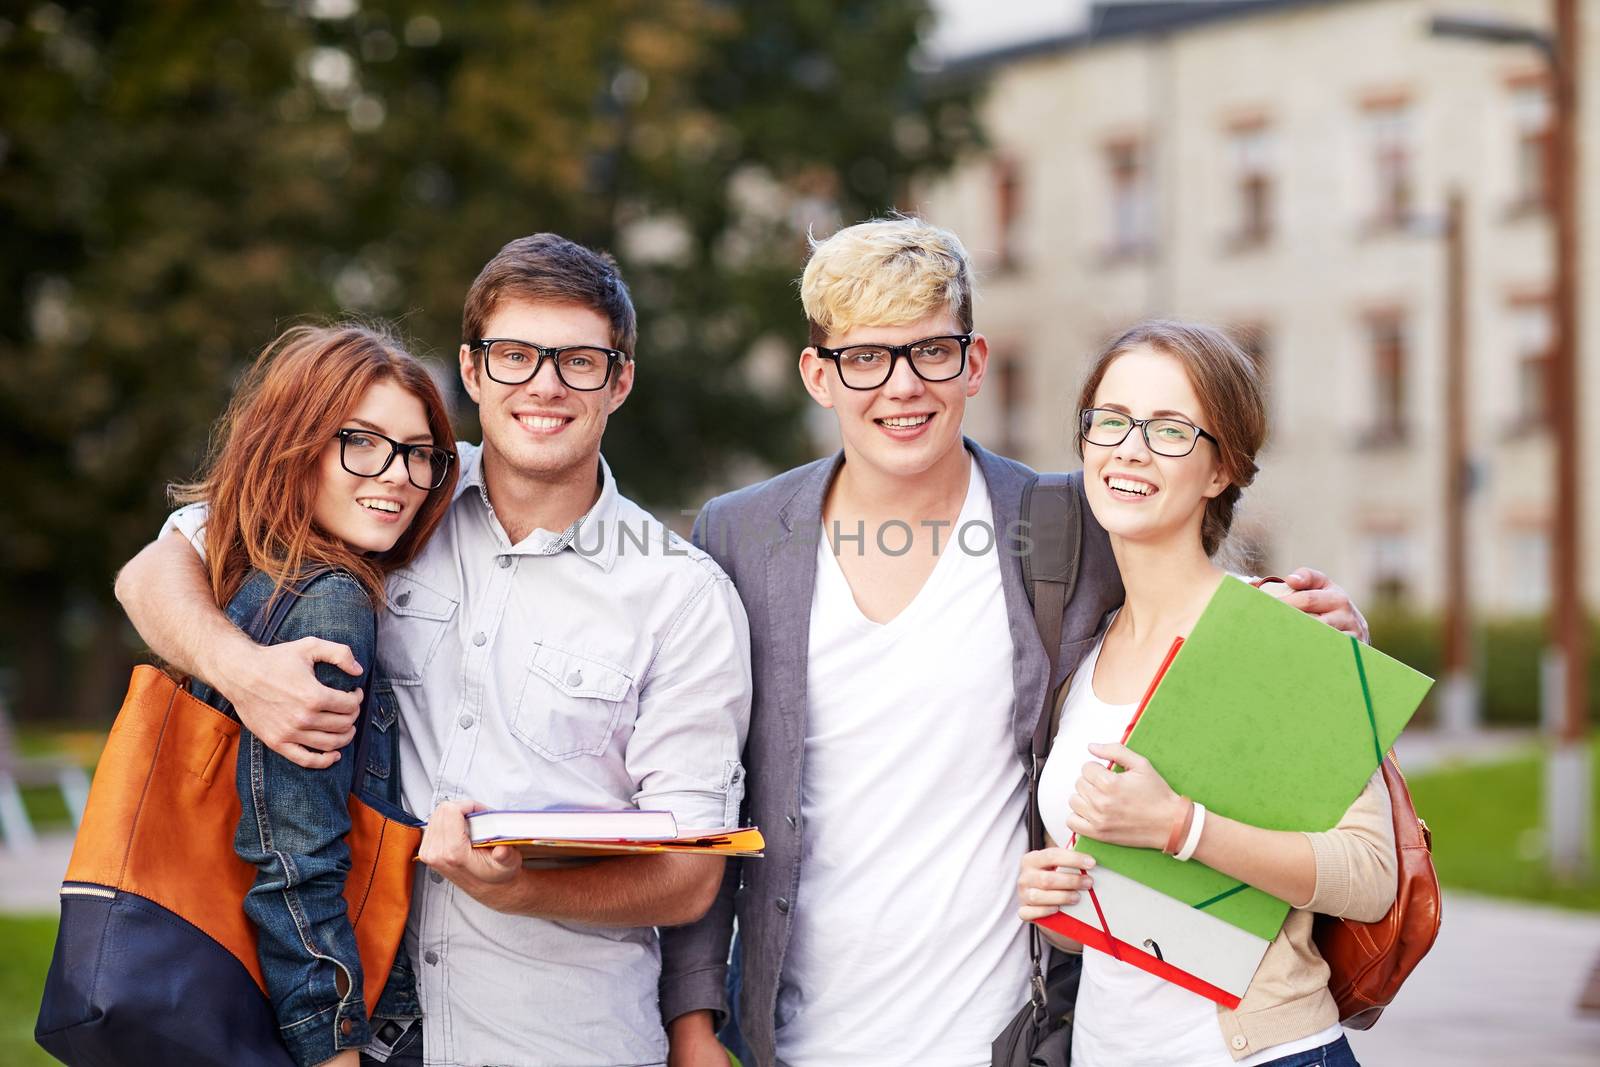 education, campus, friendship and people concept - group of happy teenage students with school folders